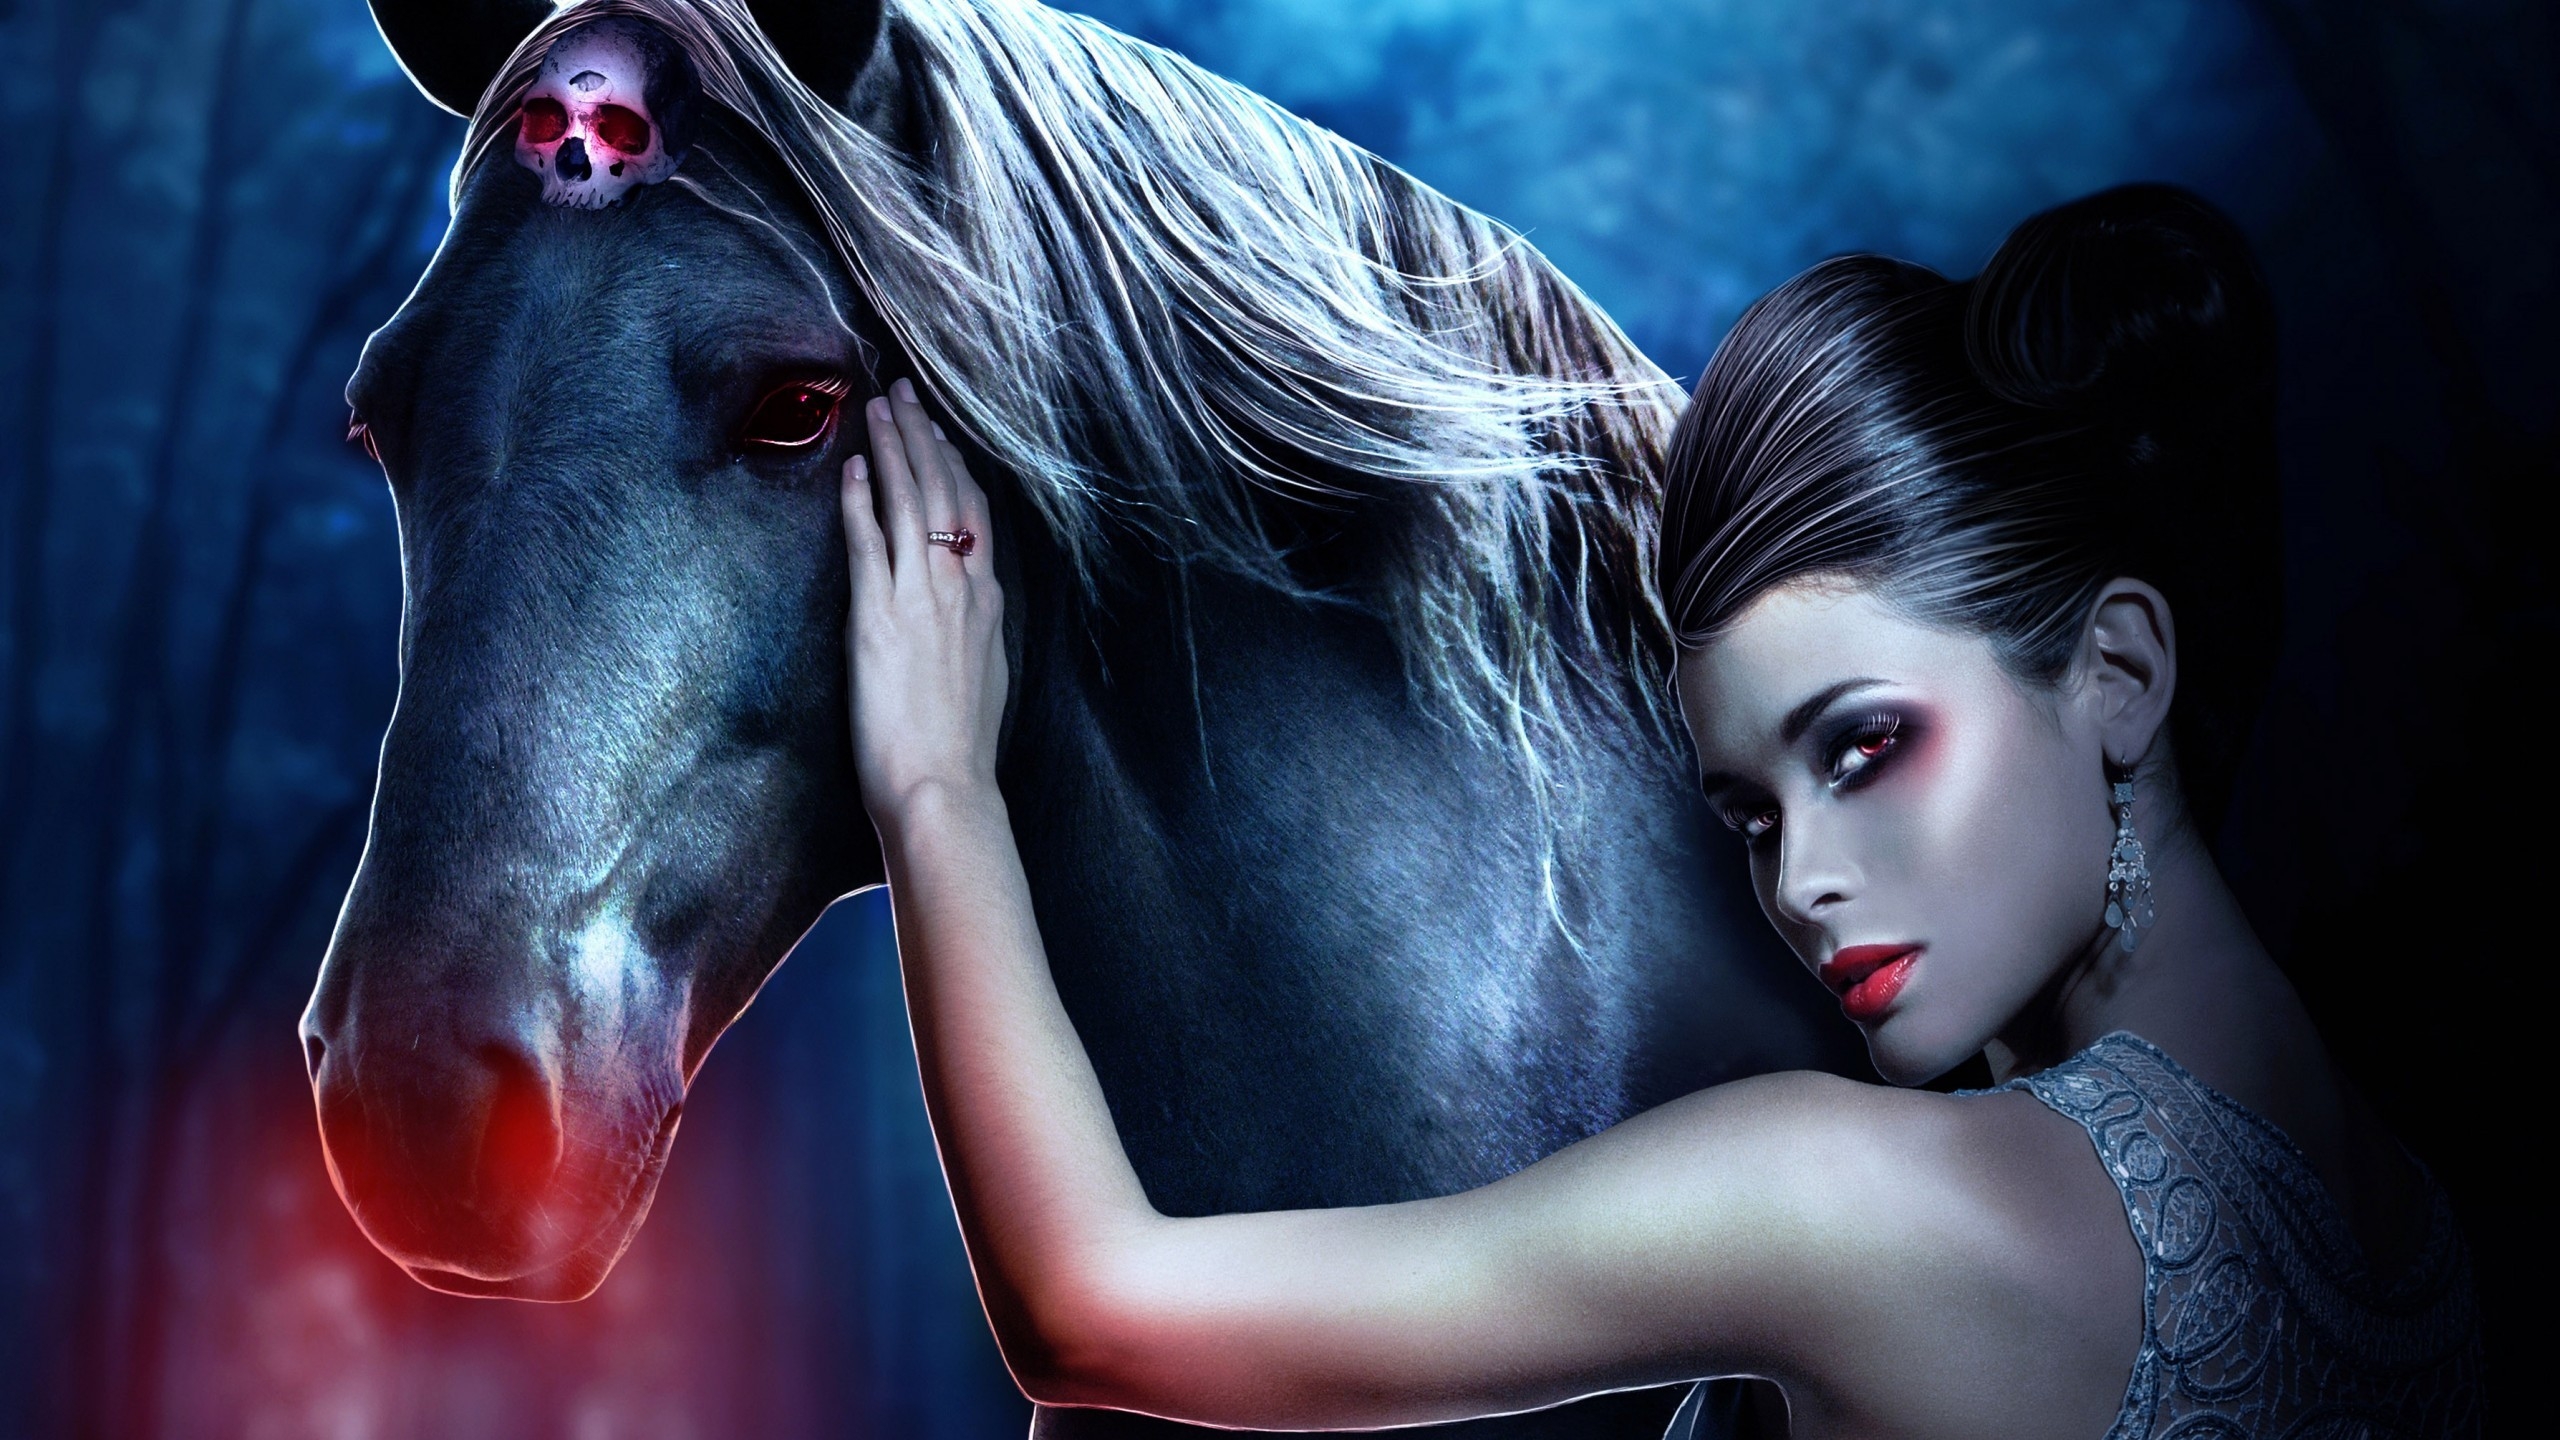 Beautiful Woman and Horse for 2560x1440 HDTV resolution